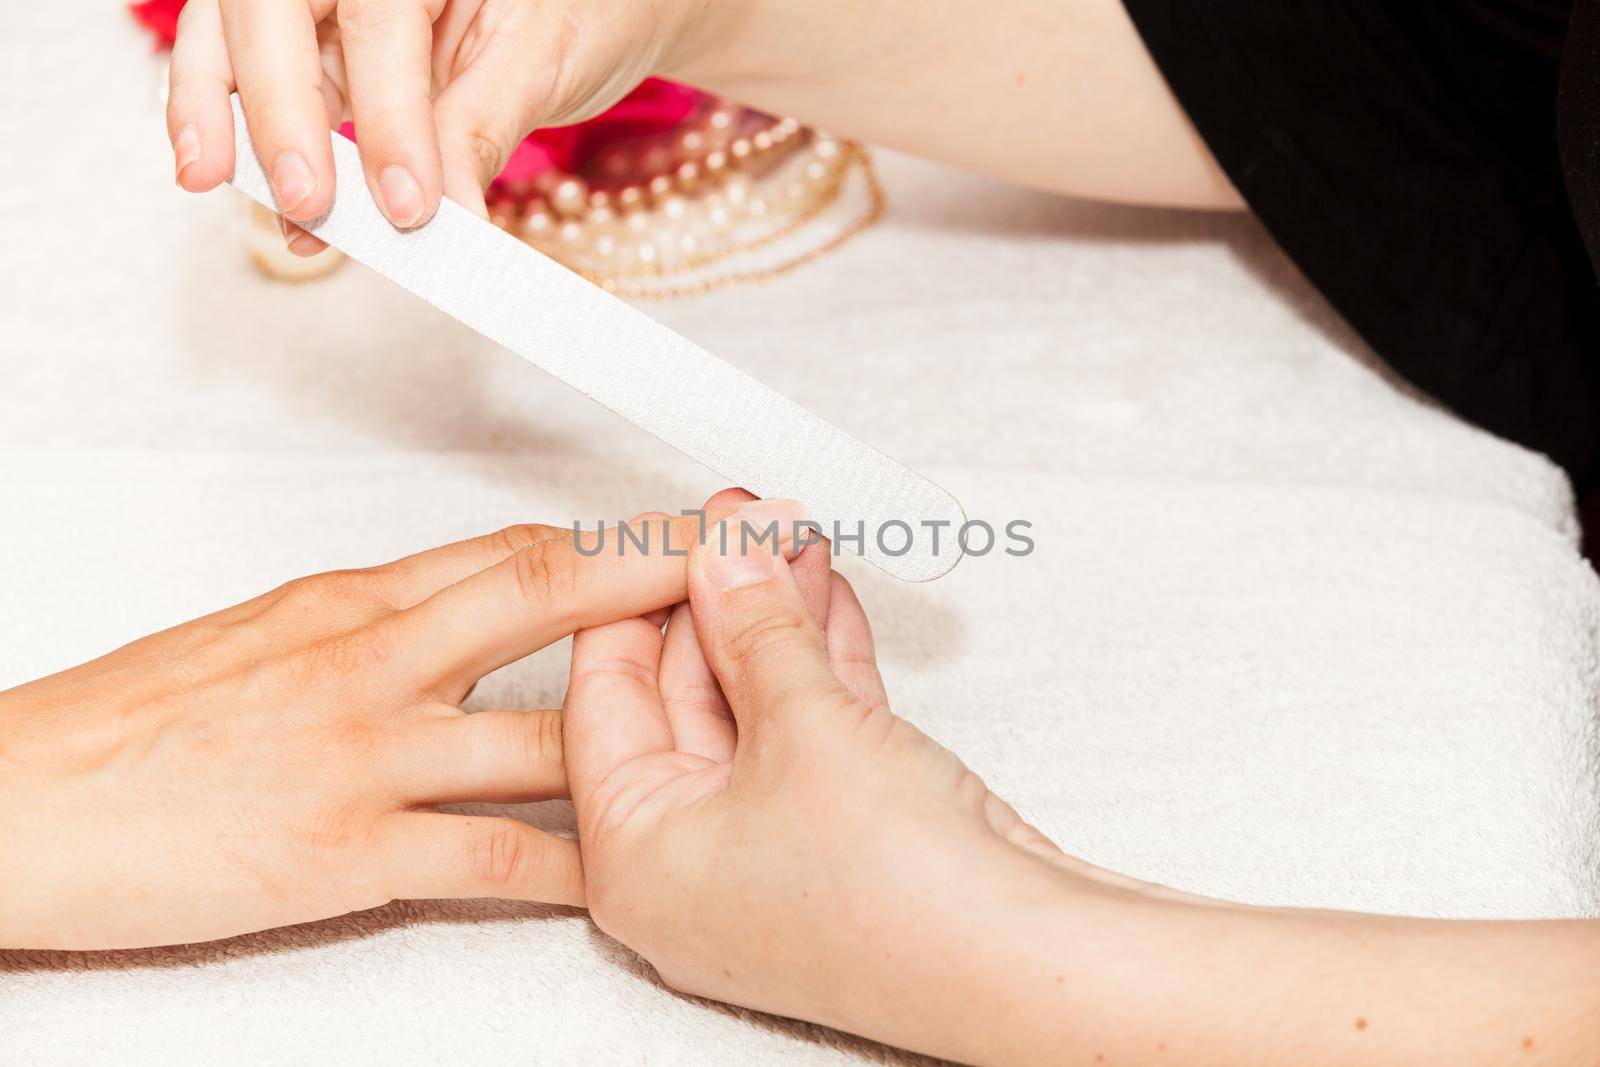 The beautician polish the client's nails before putting nail polish